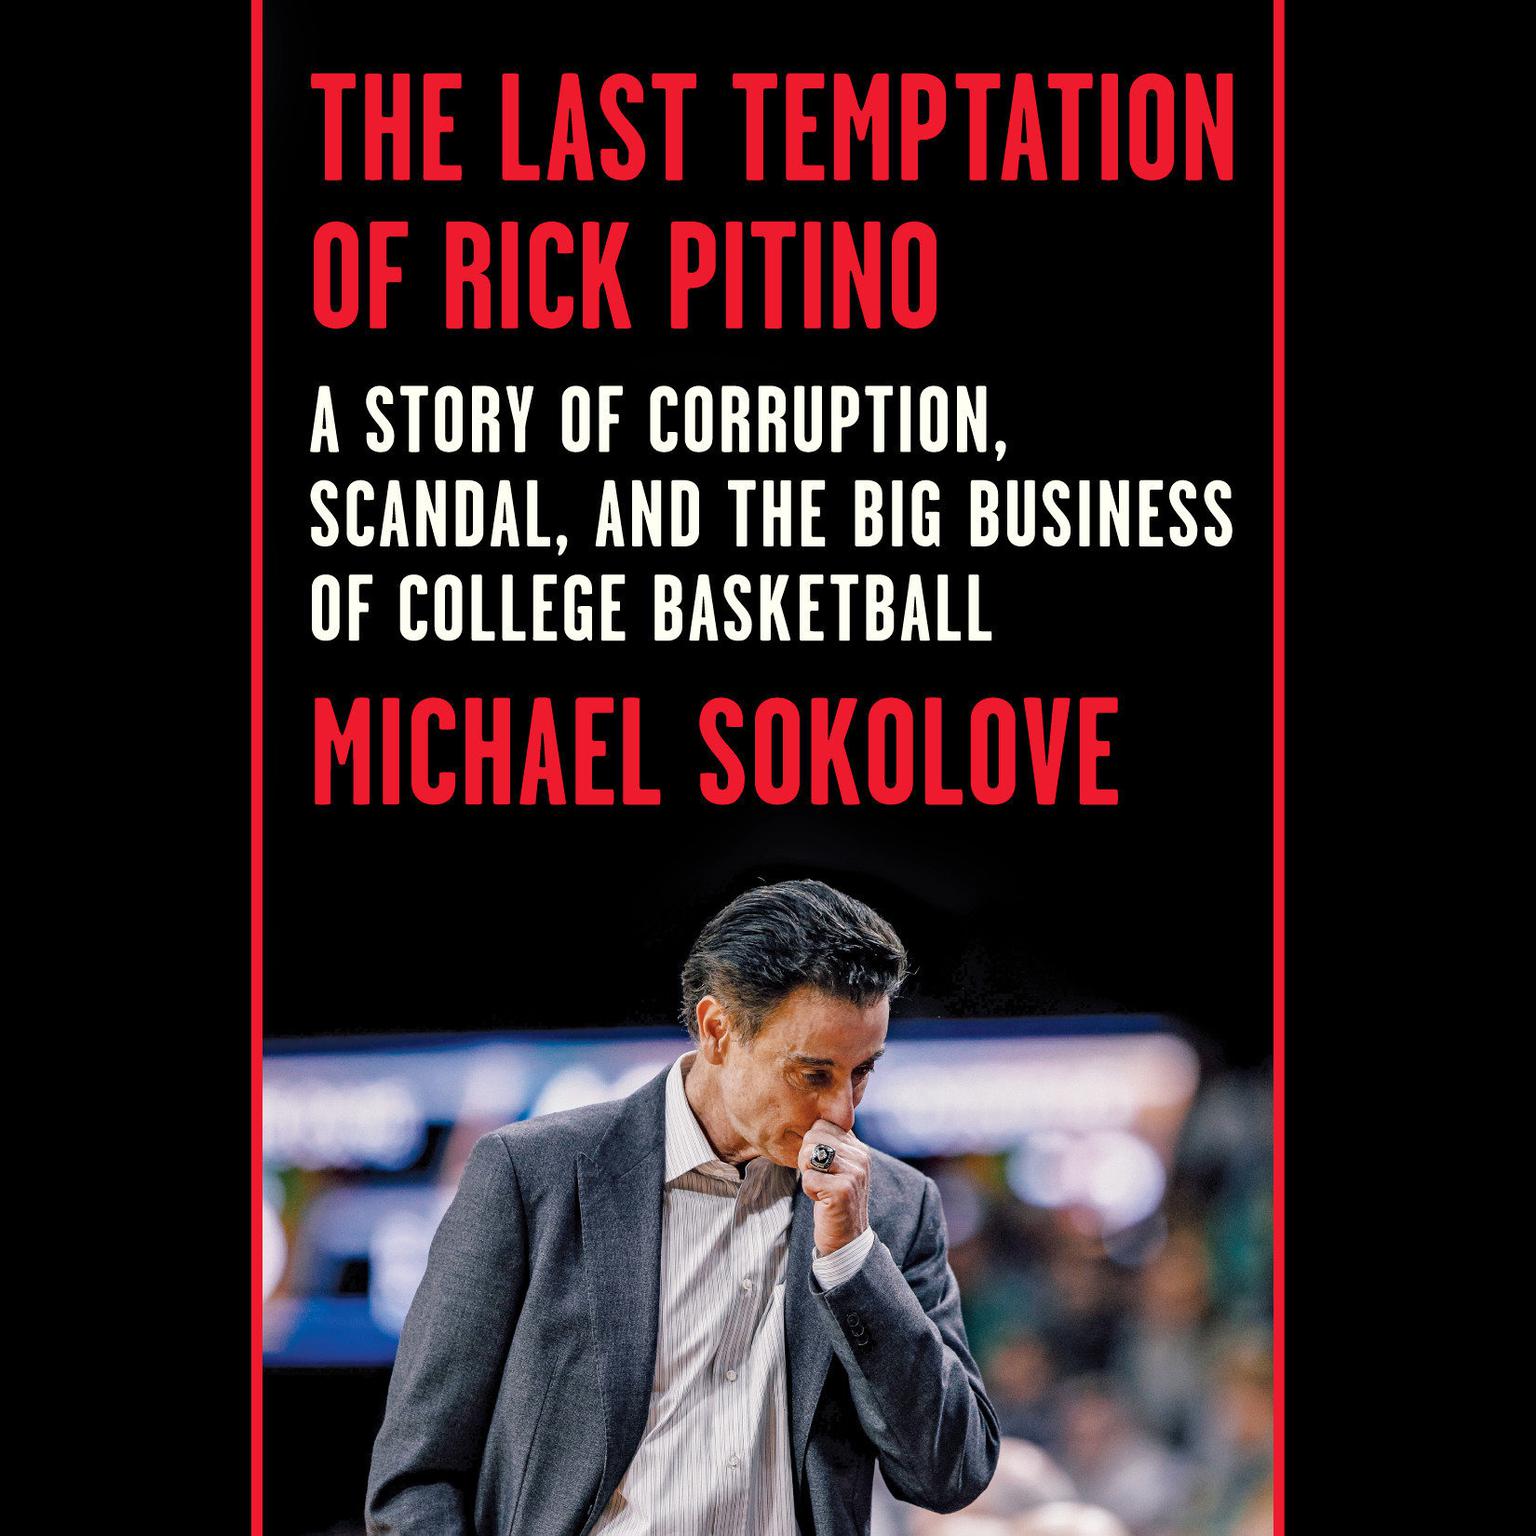 The Last Temptation of Rick Pitino: A Story of Corruption, Scandal, and the Big Business of College Basketball Audiobook, by Michael Sokolove